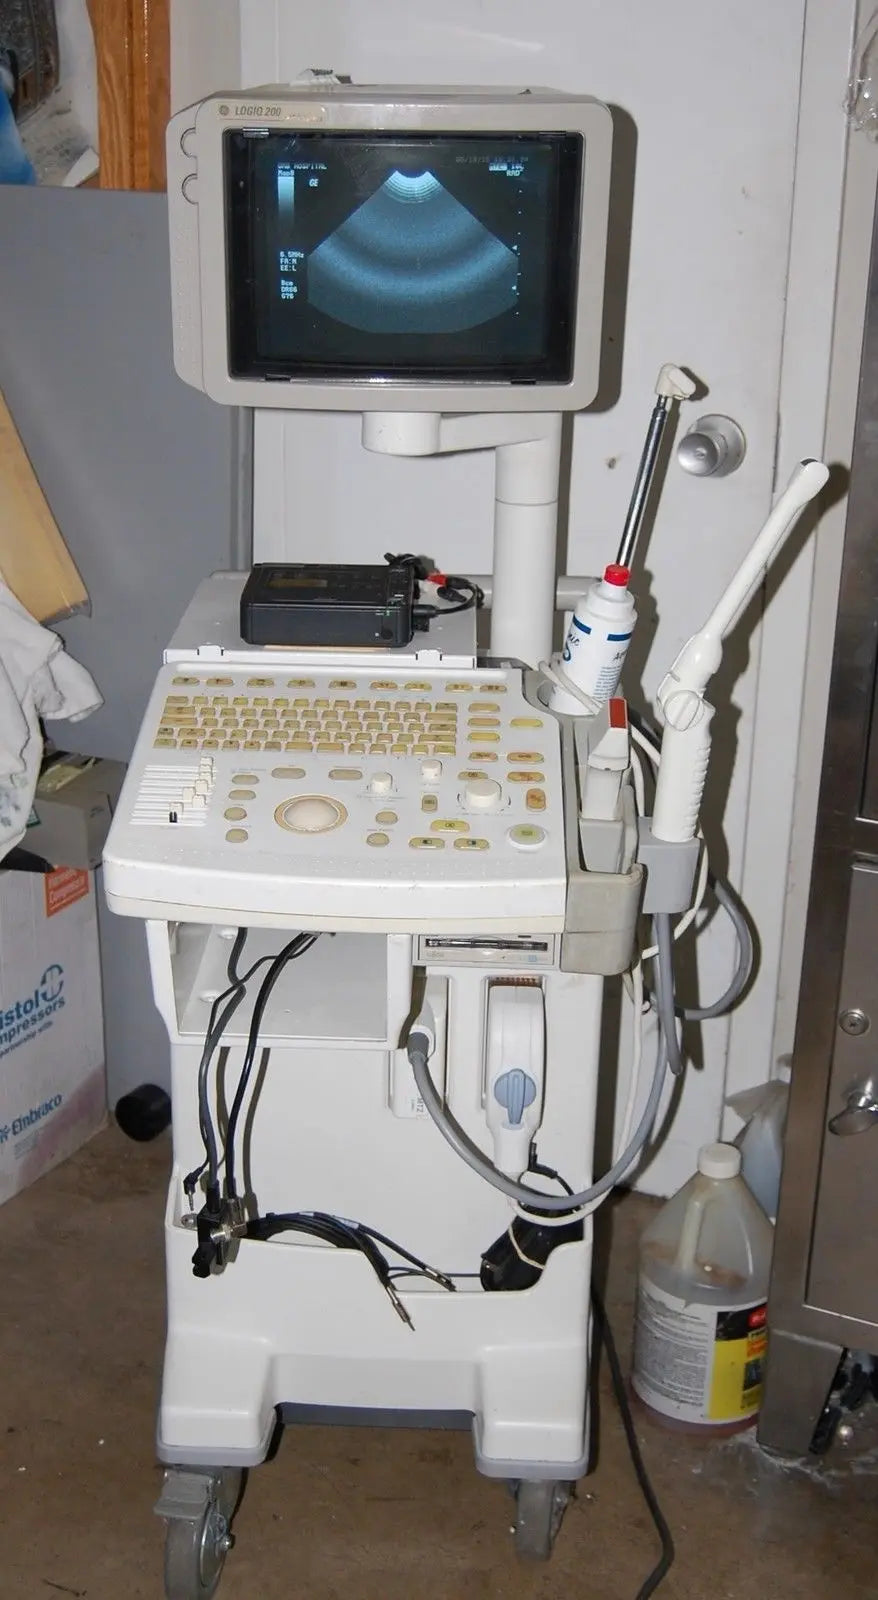 GE Logiq 200 Pro Ultrasound with 2 Transducer Probe Imaging Urology OBGYN #12367 DIAGNOSTIC ULTRASOUND MACHINES FOR SALE